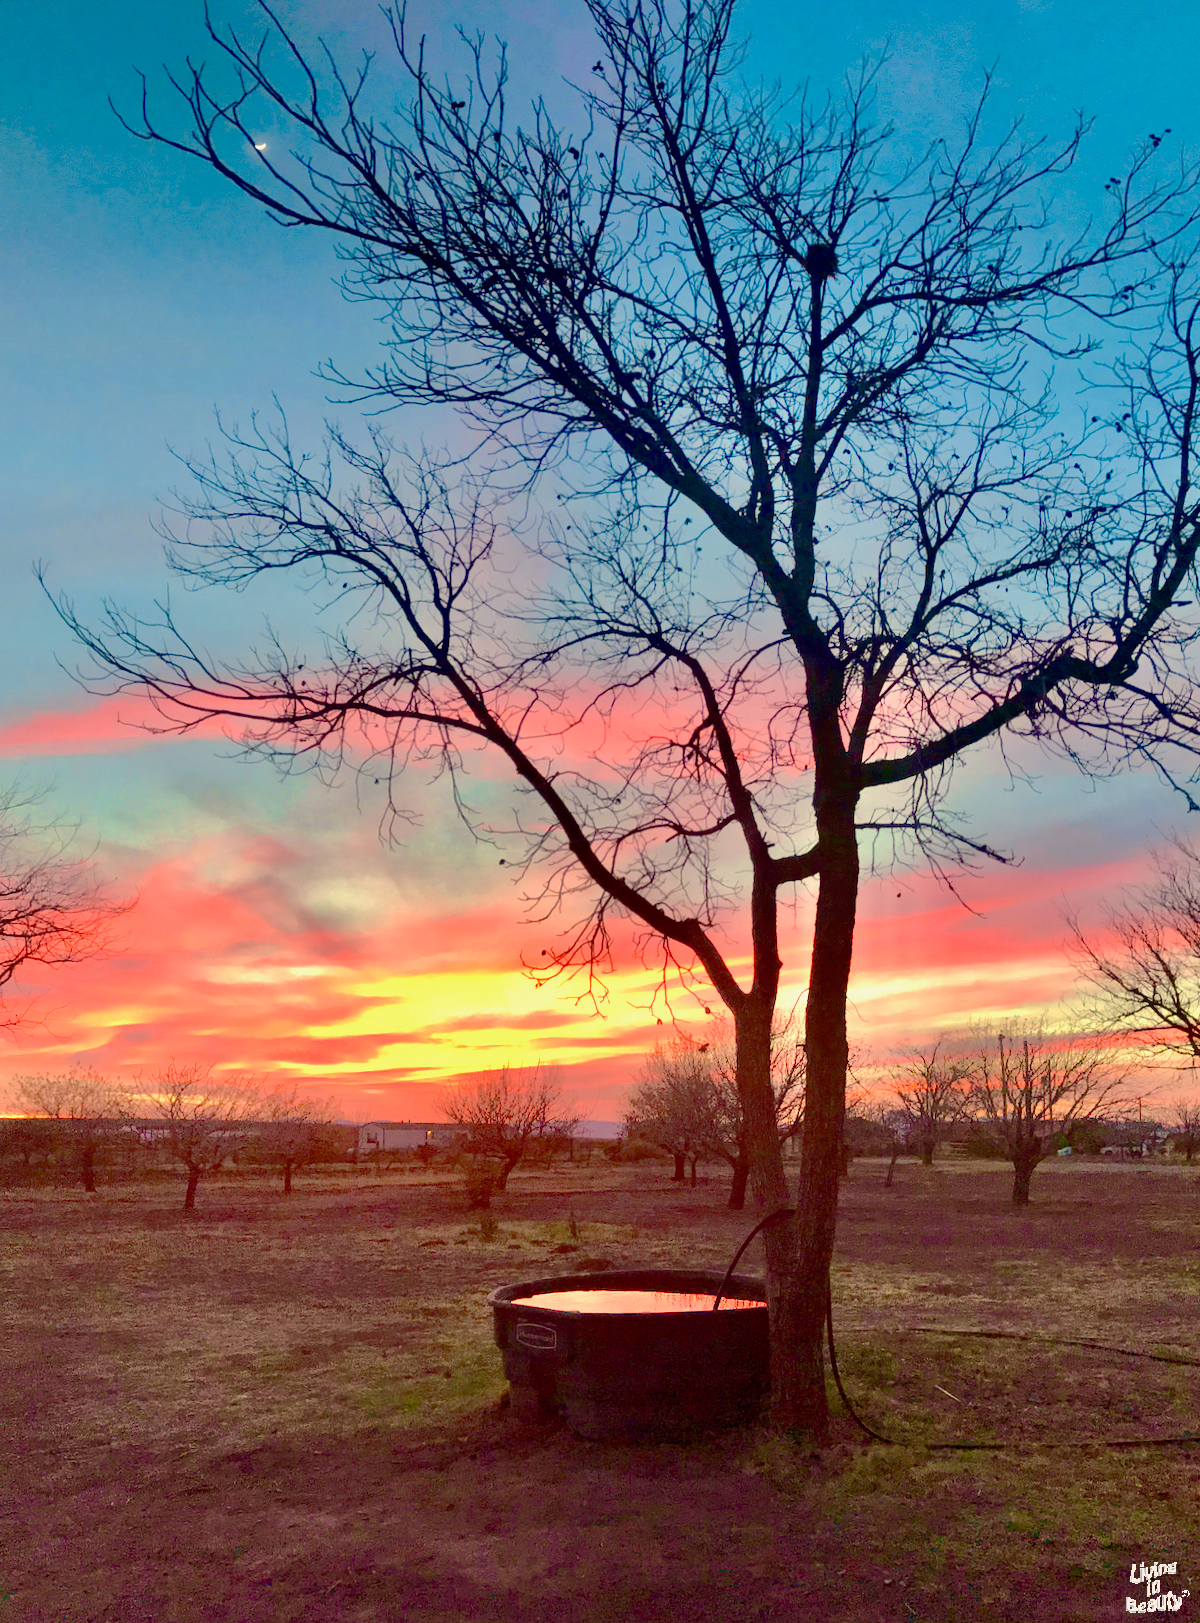 The sun setting with a blue, pink, and yellow sky with a fire ring and tree in the foreground.